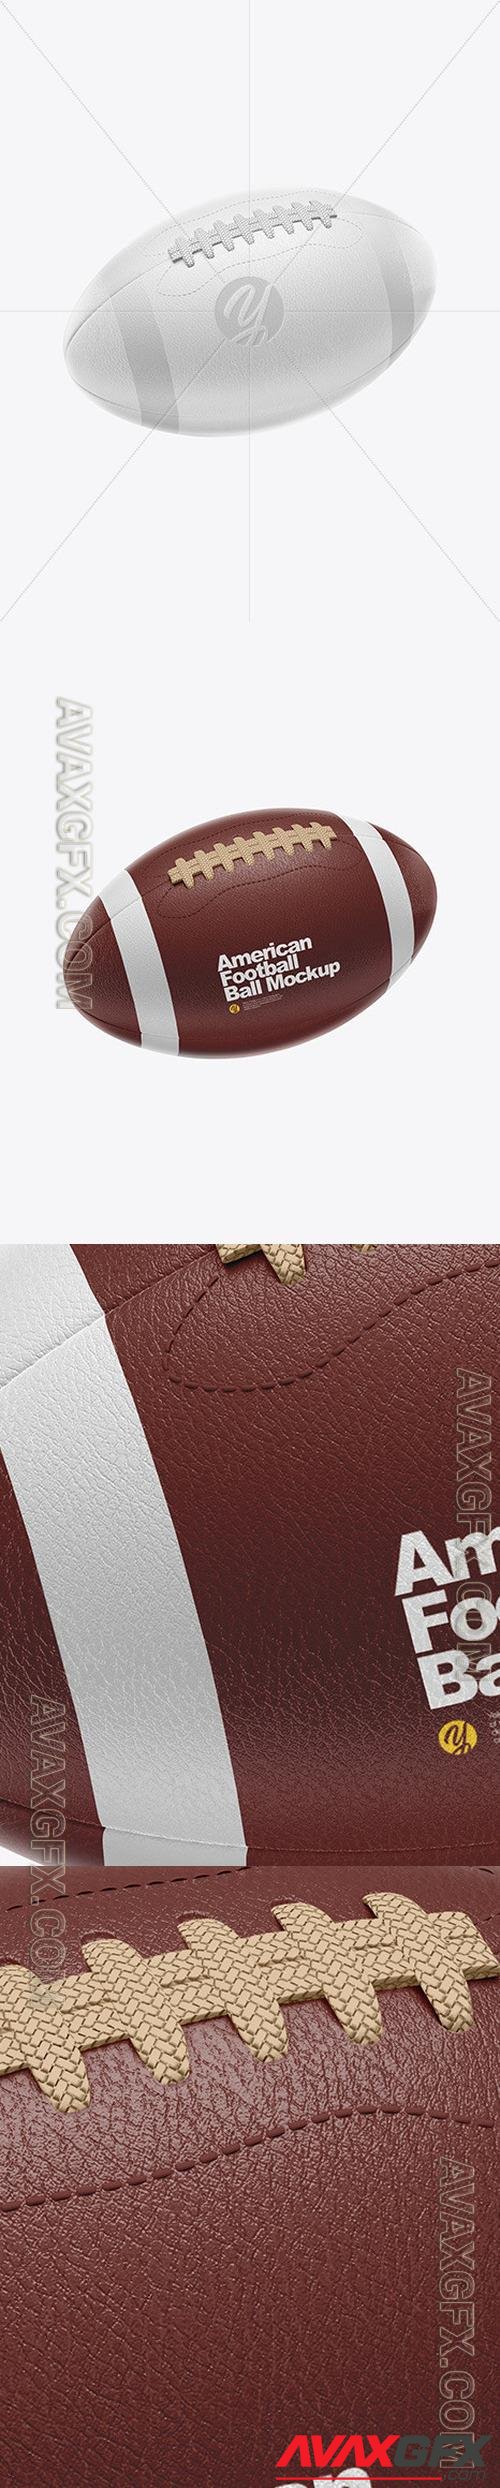 Rugby Ball Mockup - Half Side View 48880 [TIF]